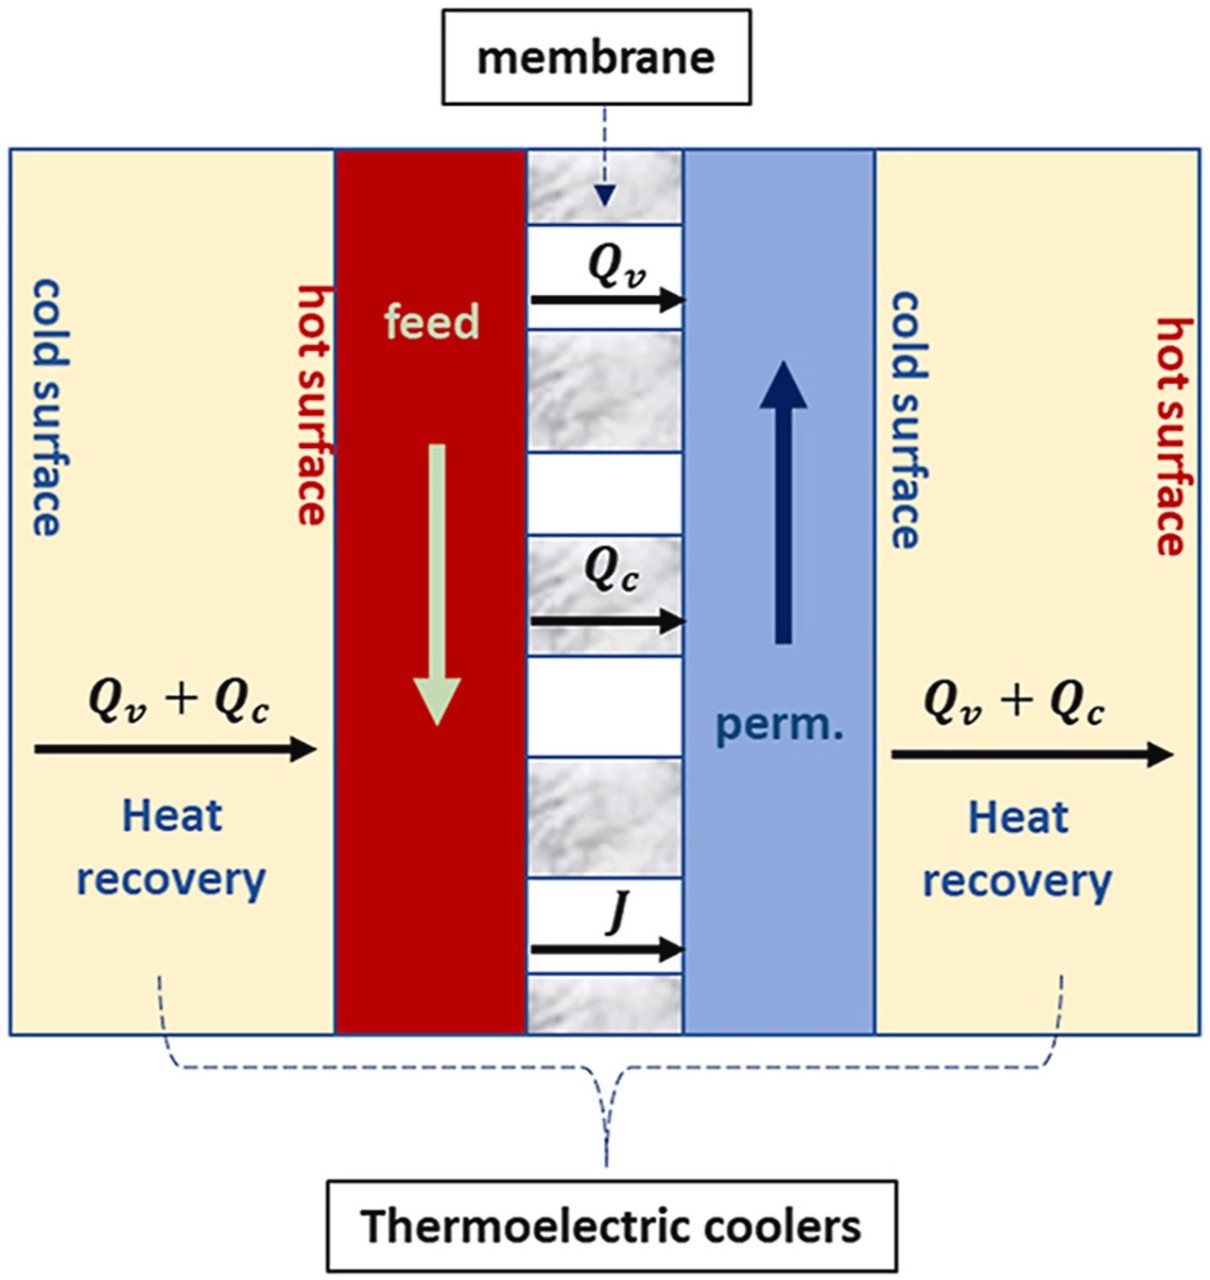 thermoelectric-membrane-distillation